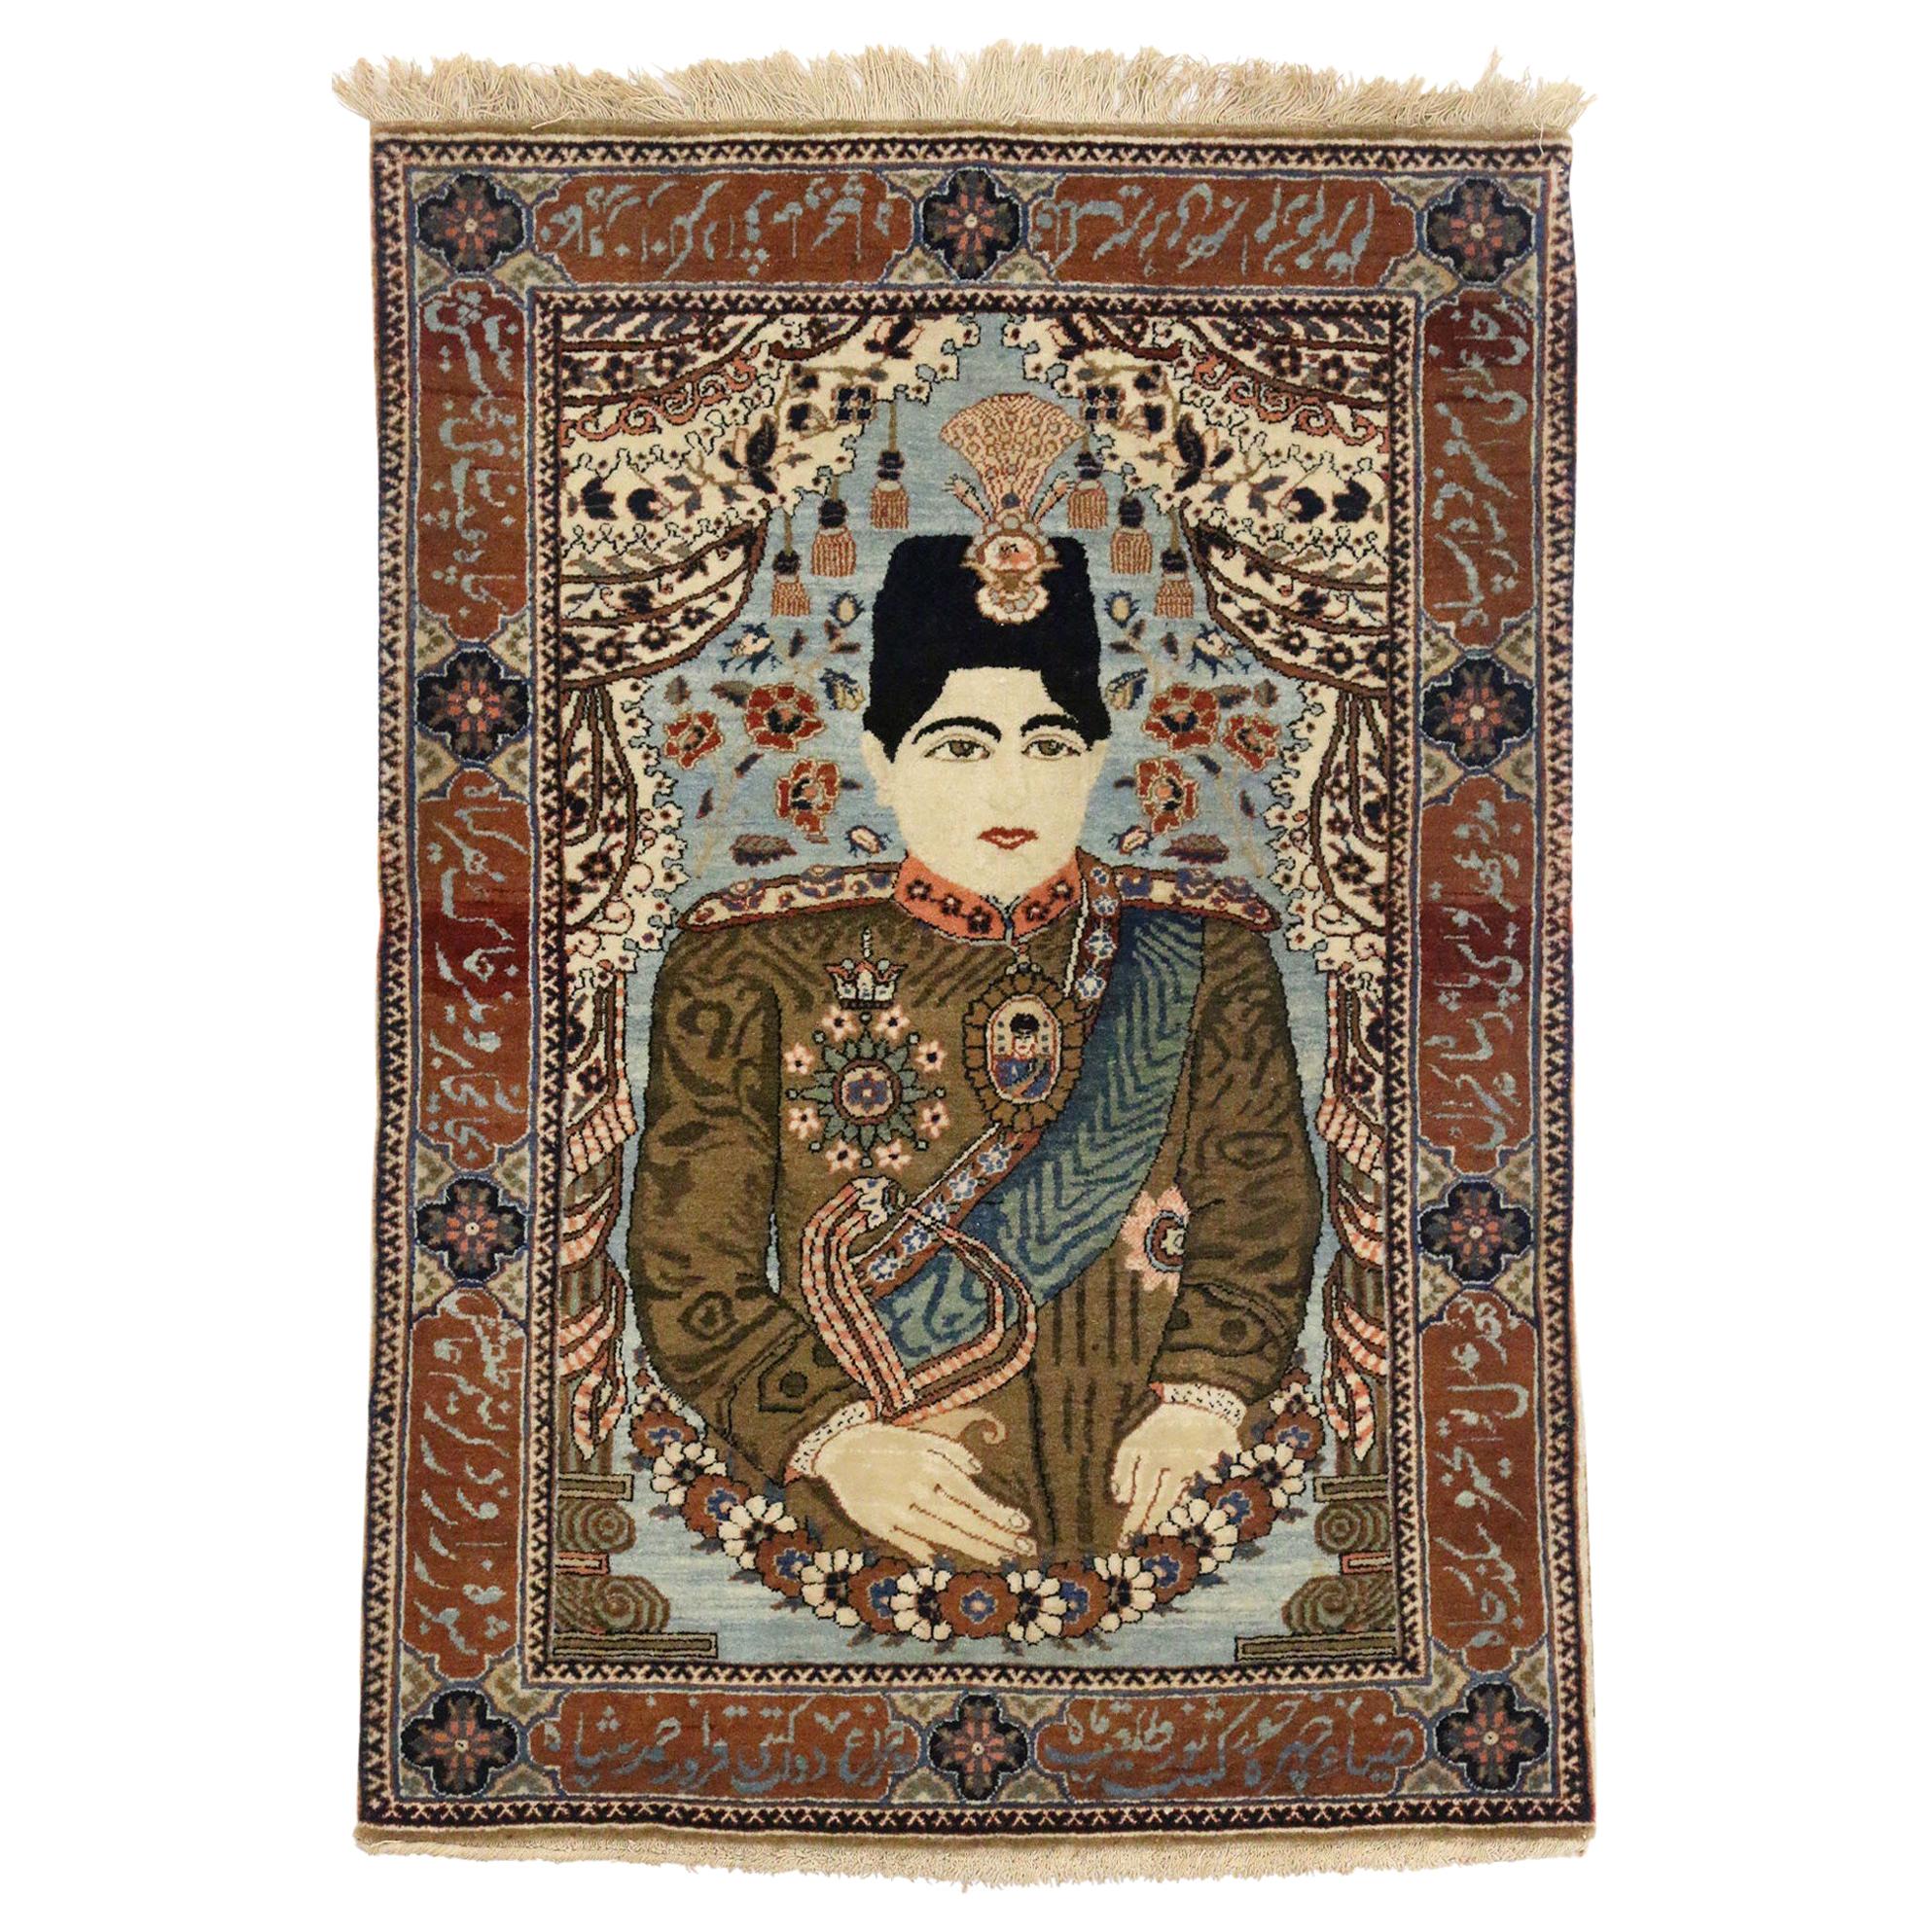 Antique Persian Mohtashem Kashan Pictorial Rug, King Ahmad Shah Qajar Tapestry For Sale